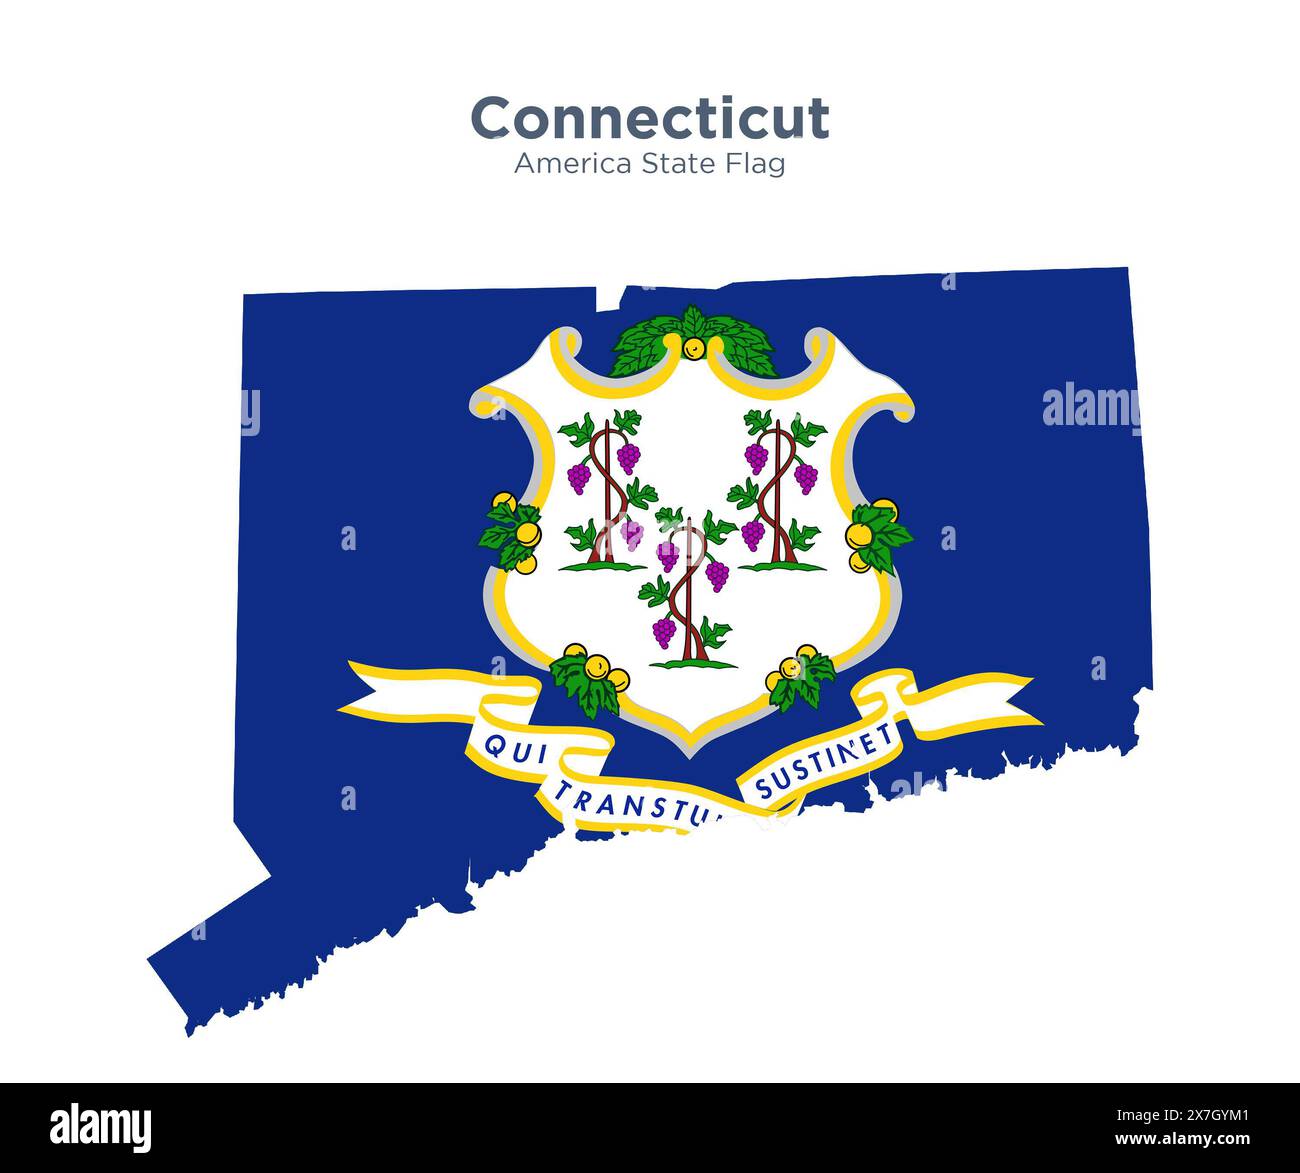 Connecticut flag and map. Flags of the U.S. states and territories. America states flag and map on white background. Stock Photo